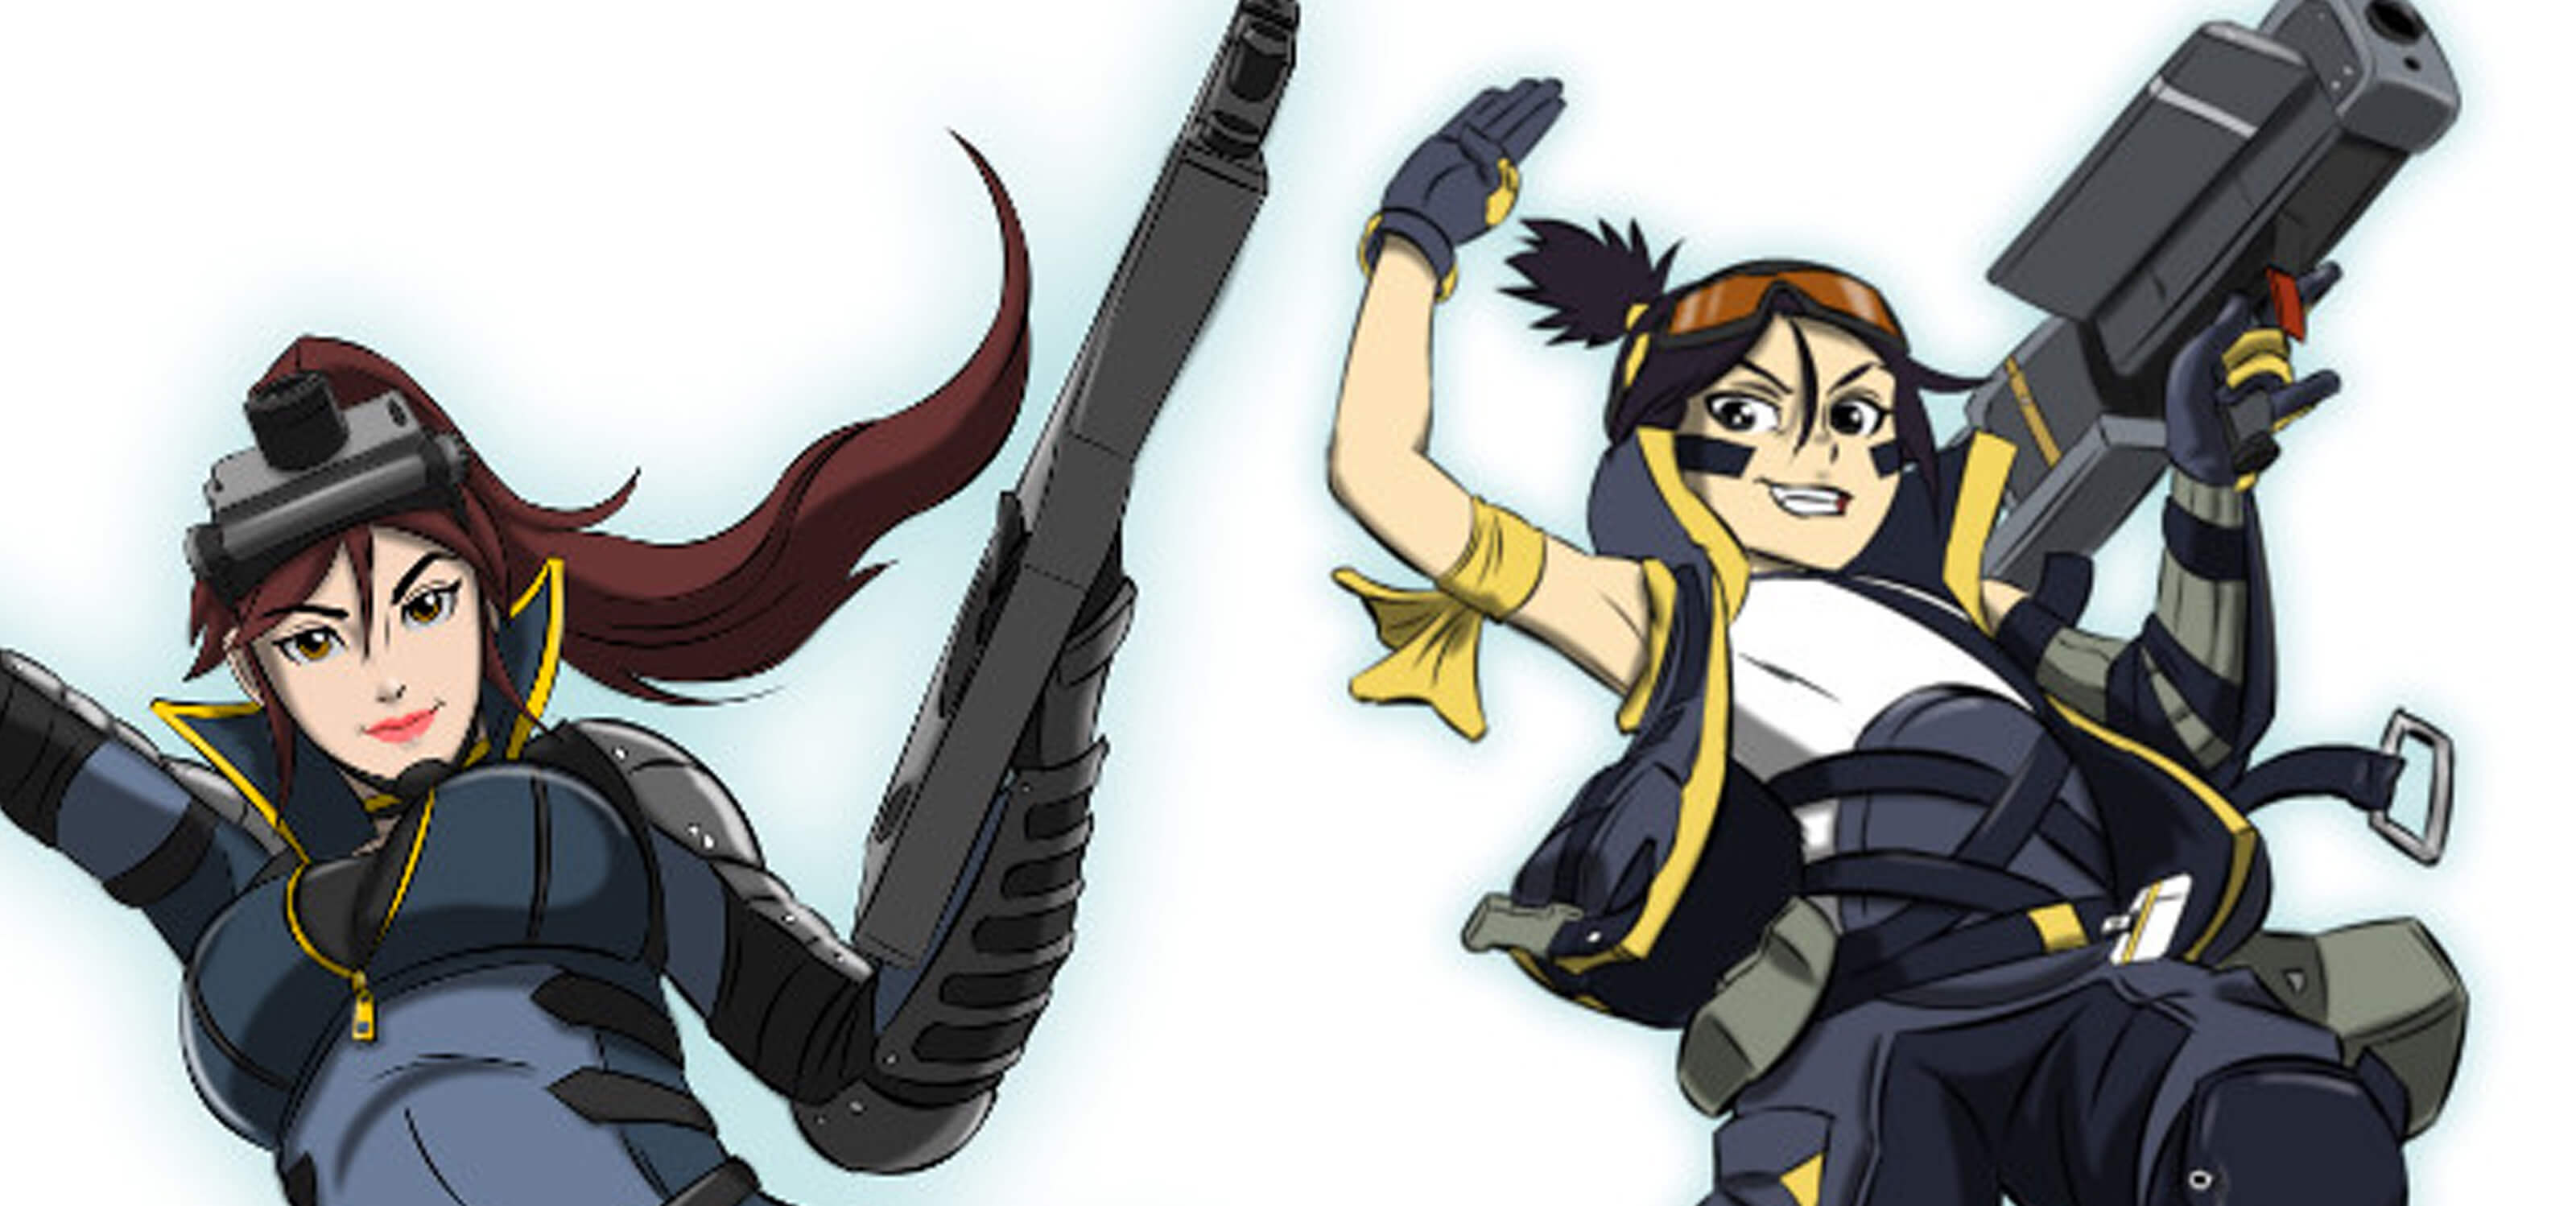 Two anime-style women are posed armed with guns and other weaponry